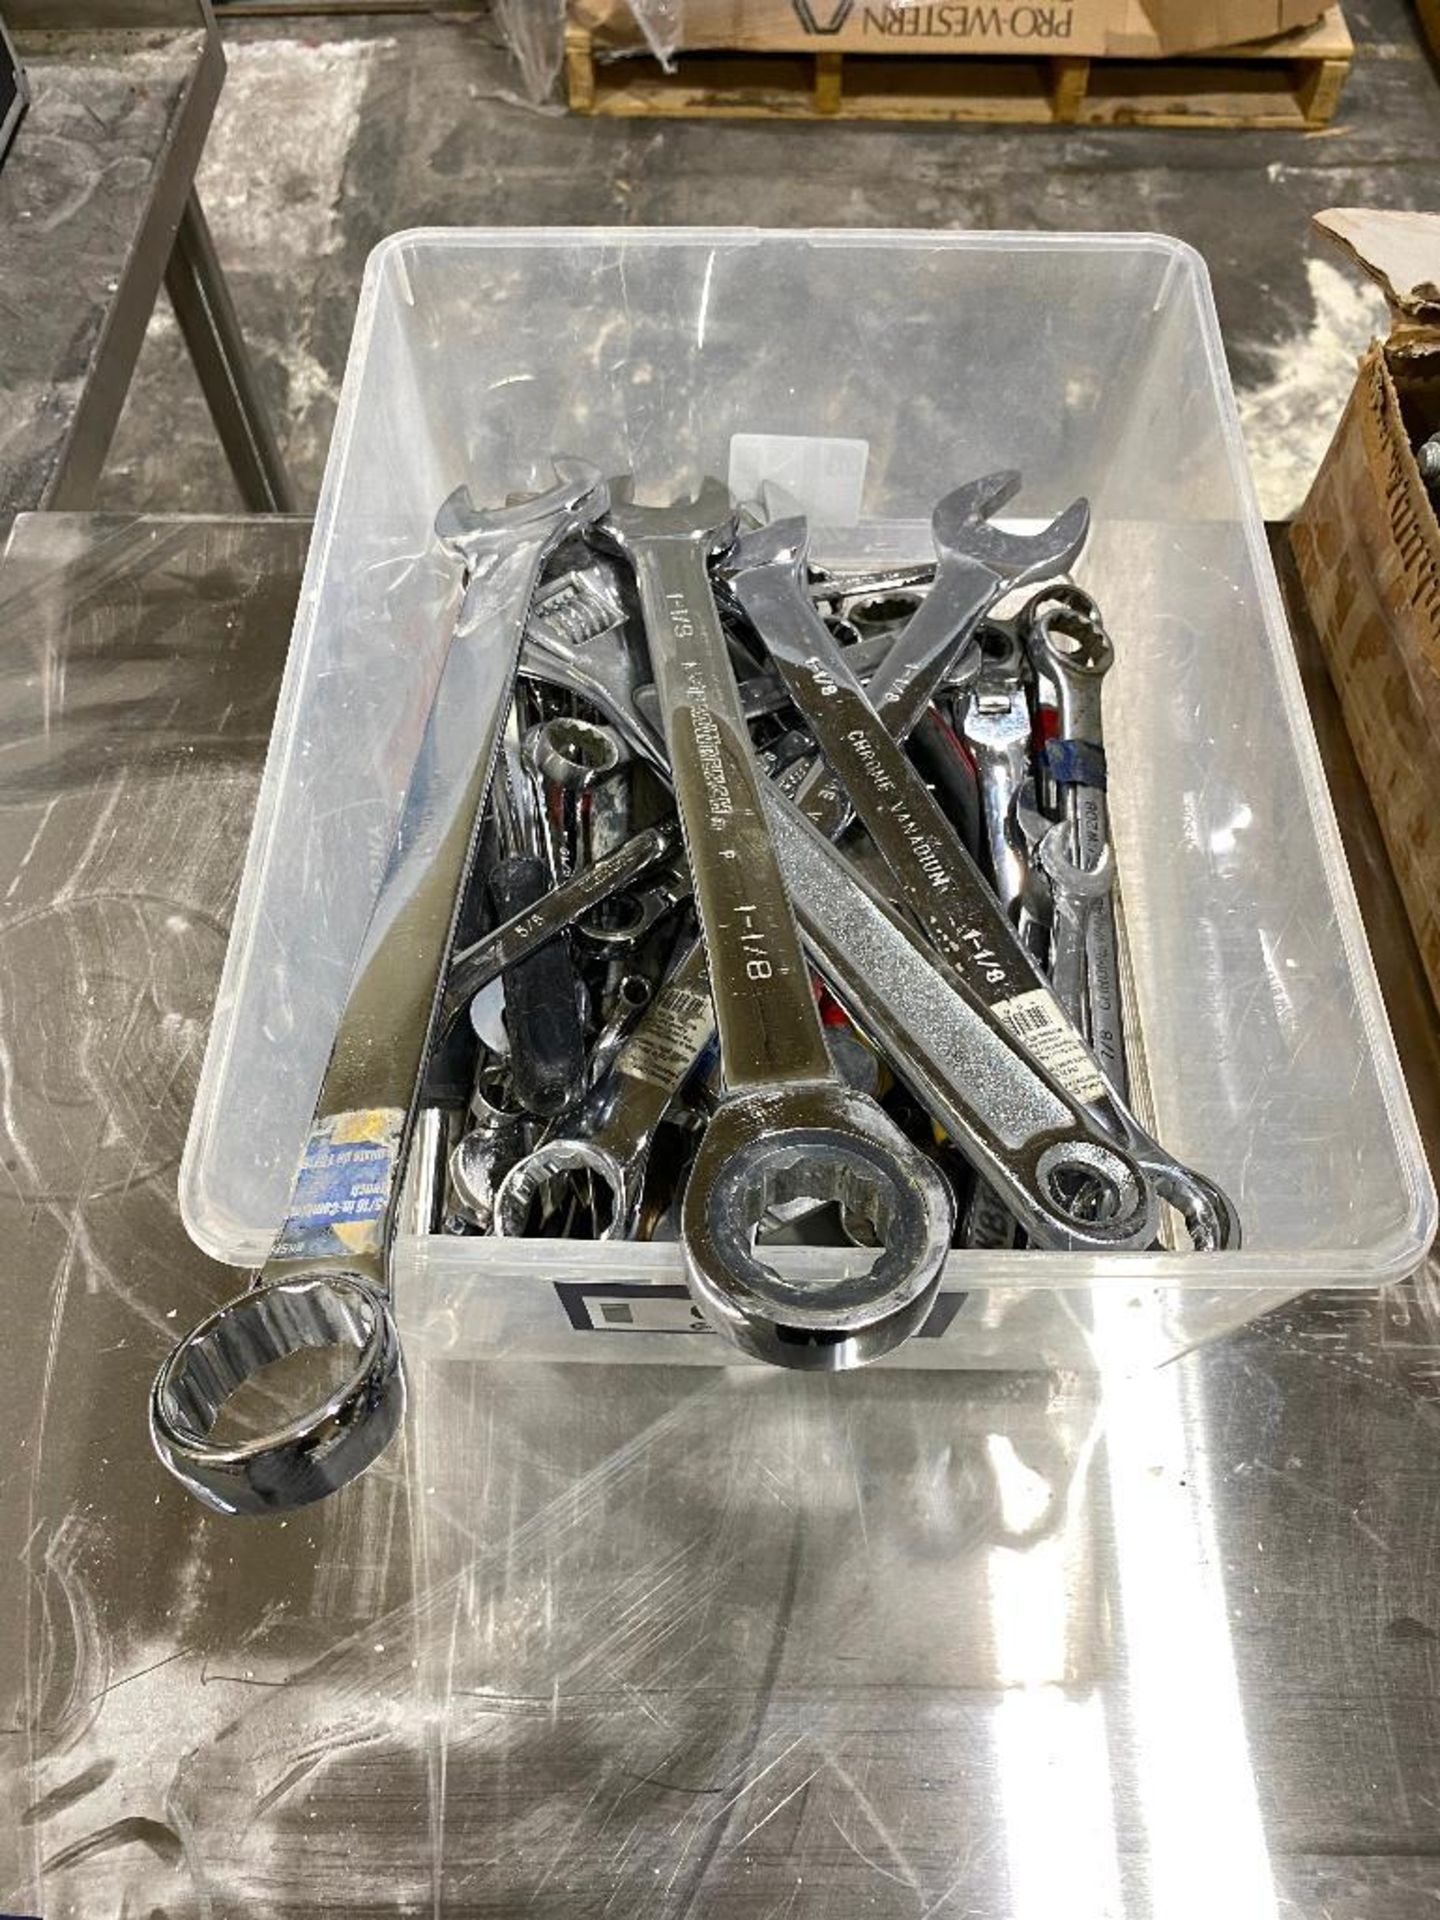 Lot of Asst. Wrenches, etc.